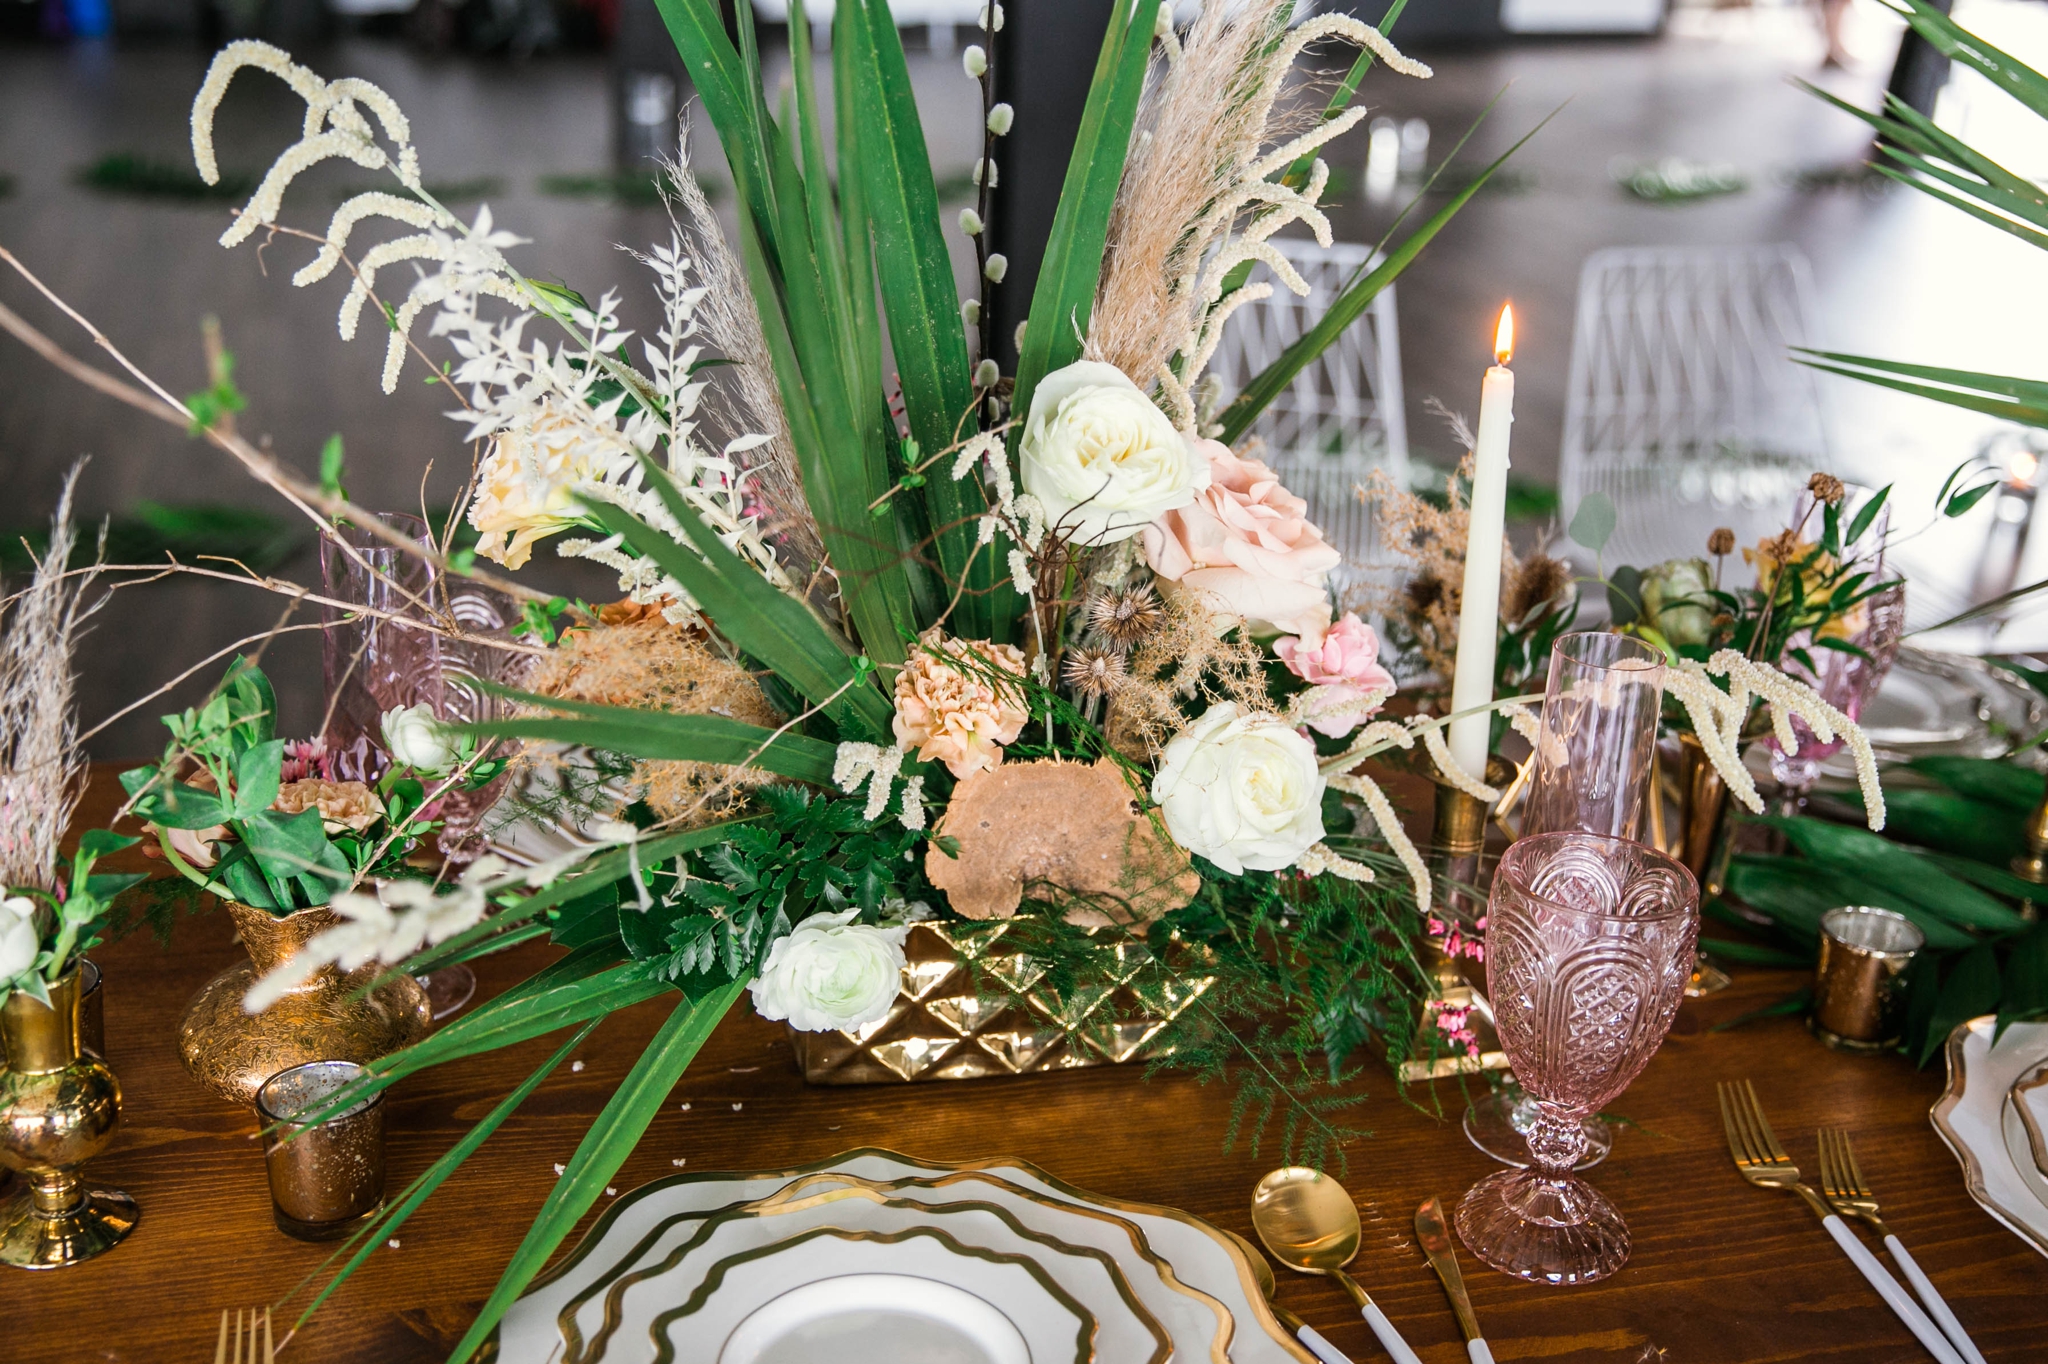  colorful flowers and big tropical center piece on a wooden family style table - Destination Wedding Inspiration - Honolulu, Oahu, Hawaii Photographer 